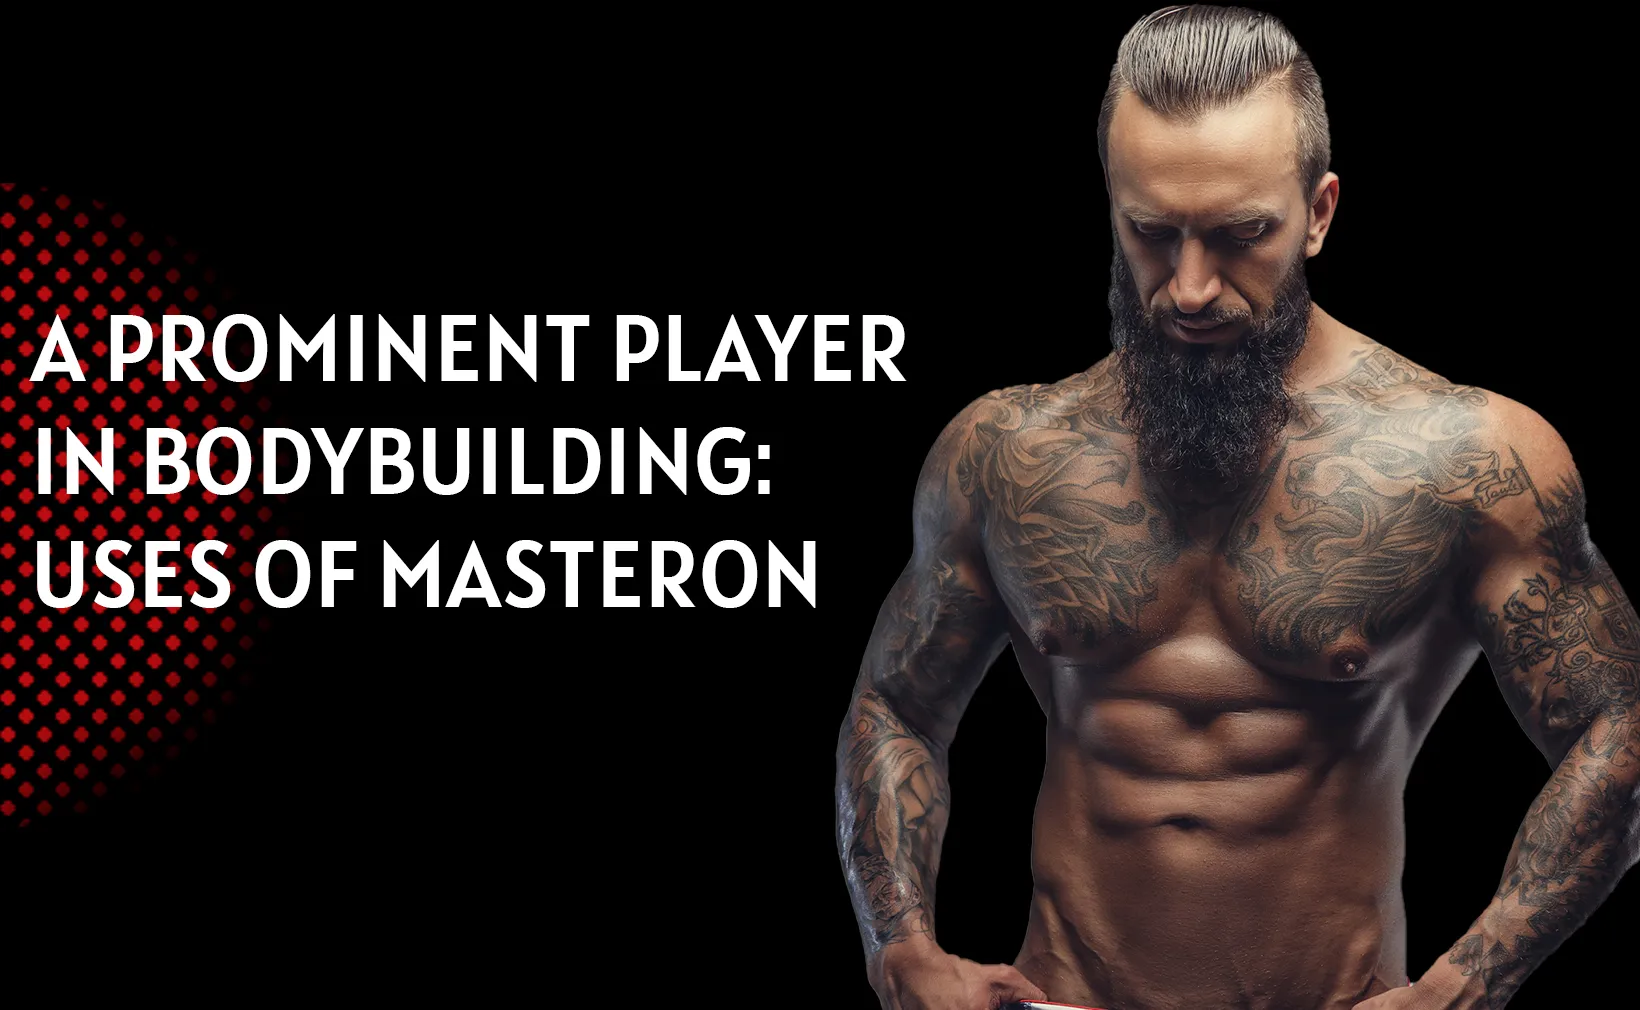 A Prominent Player in Bodybuilding: Uses of Masteron